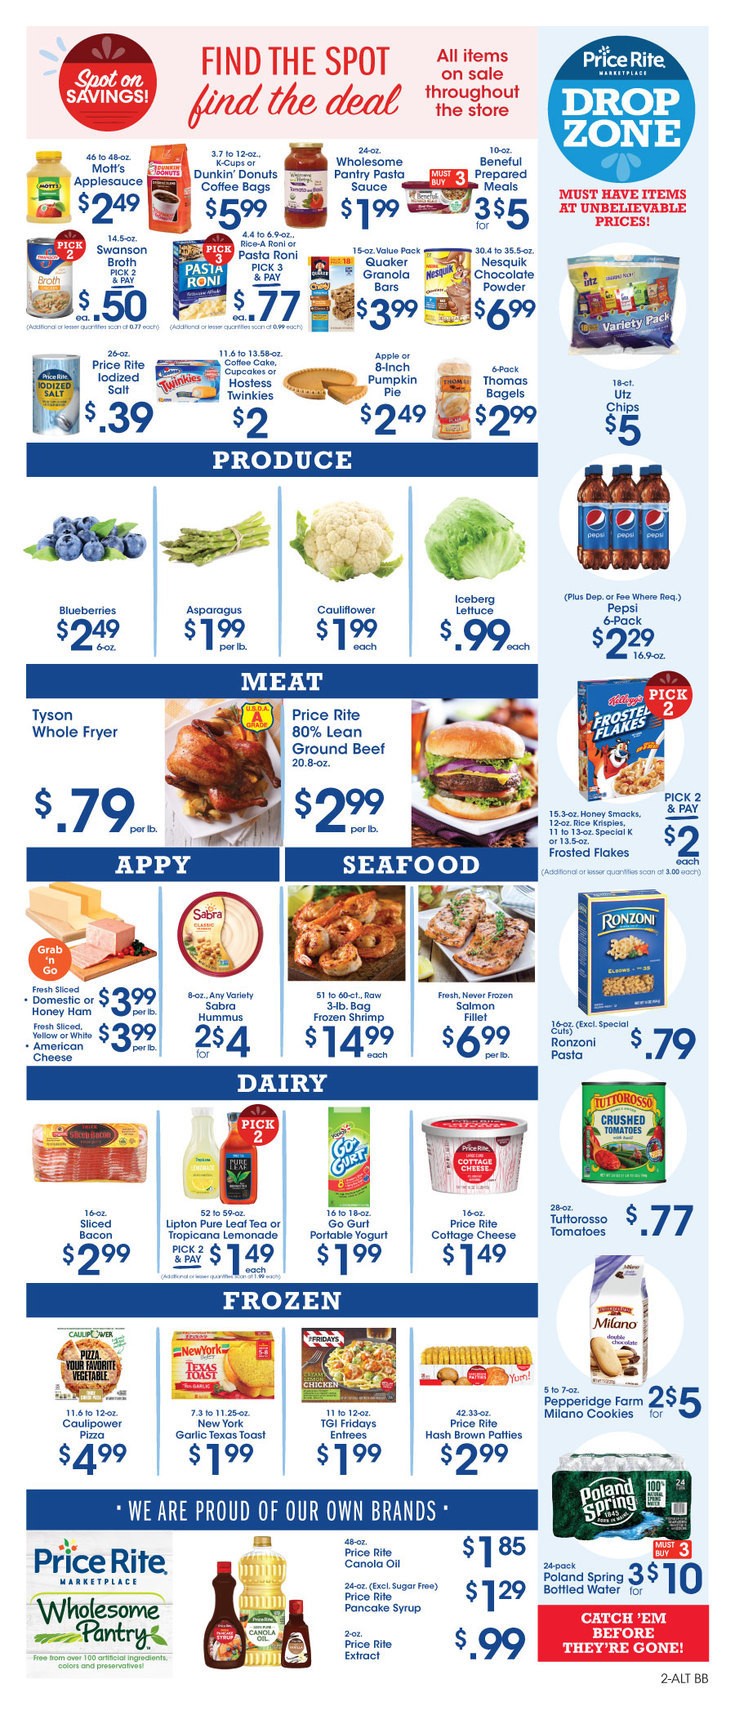 Price Rite Weekly Ad from October 11